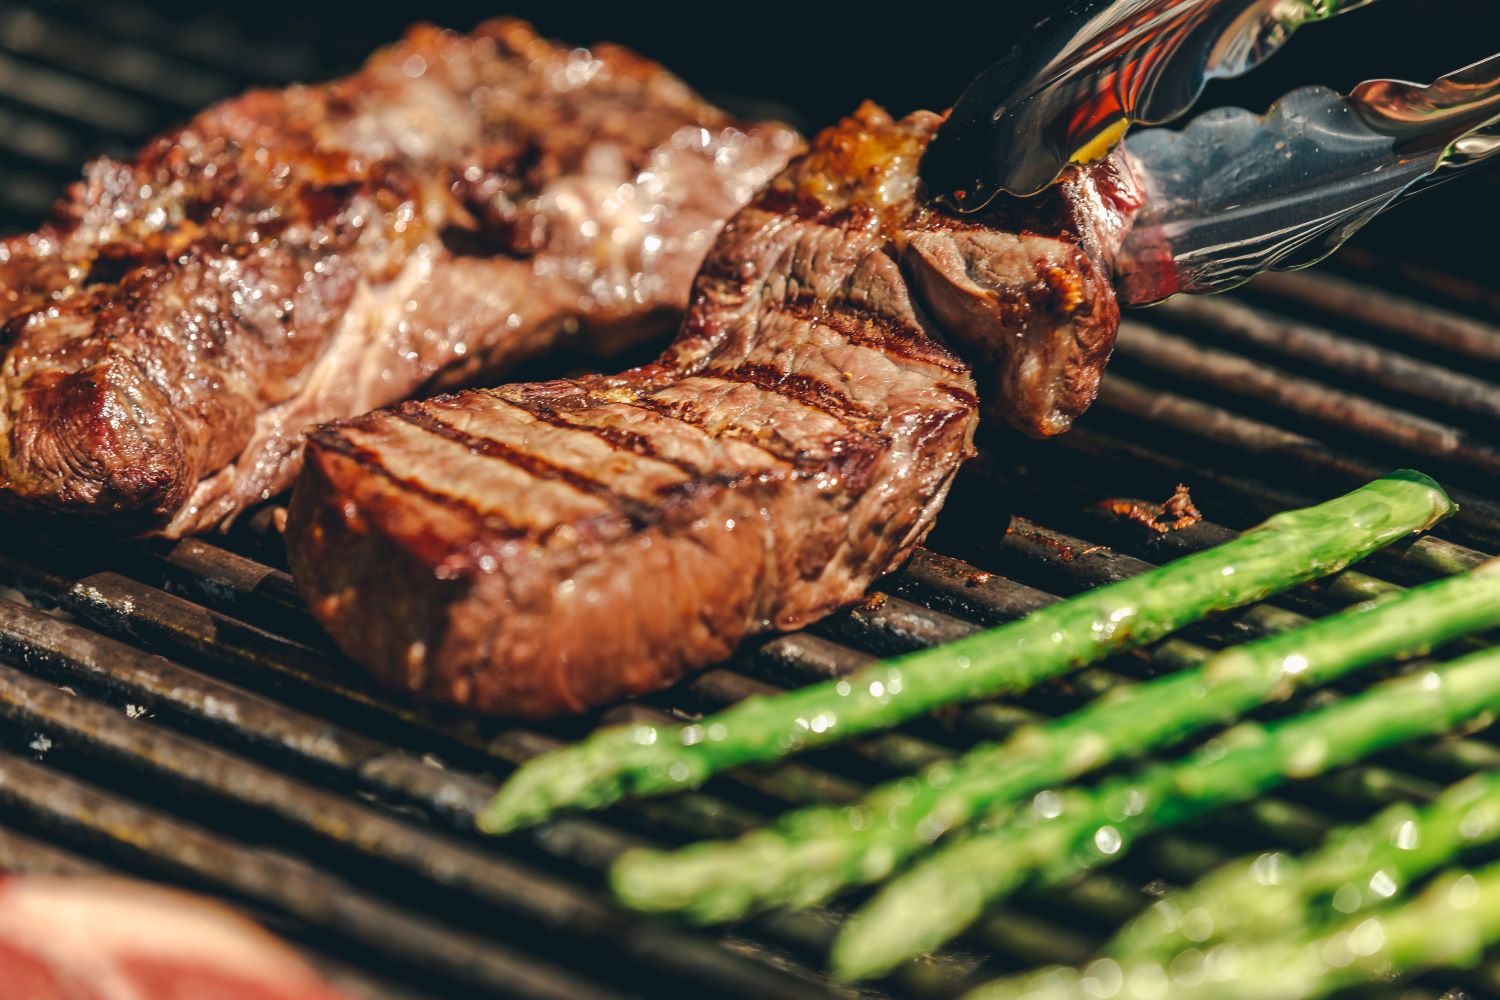 sizzling-steak-with-grilled-asparagus - Yukon Glory